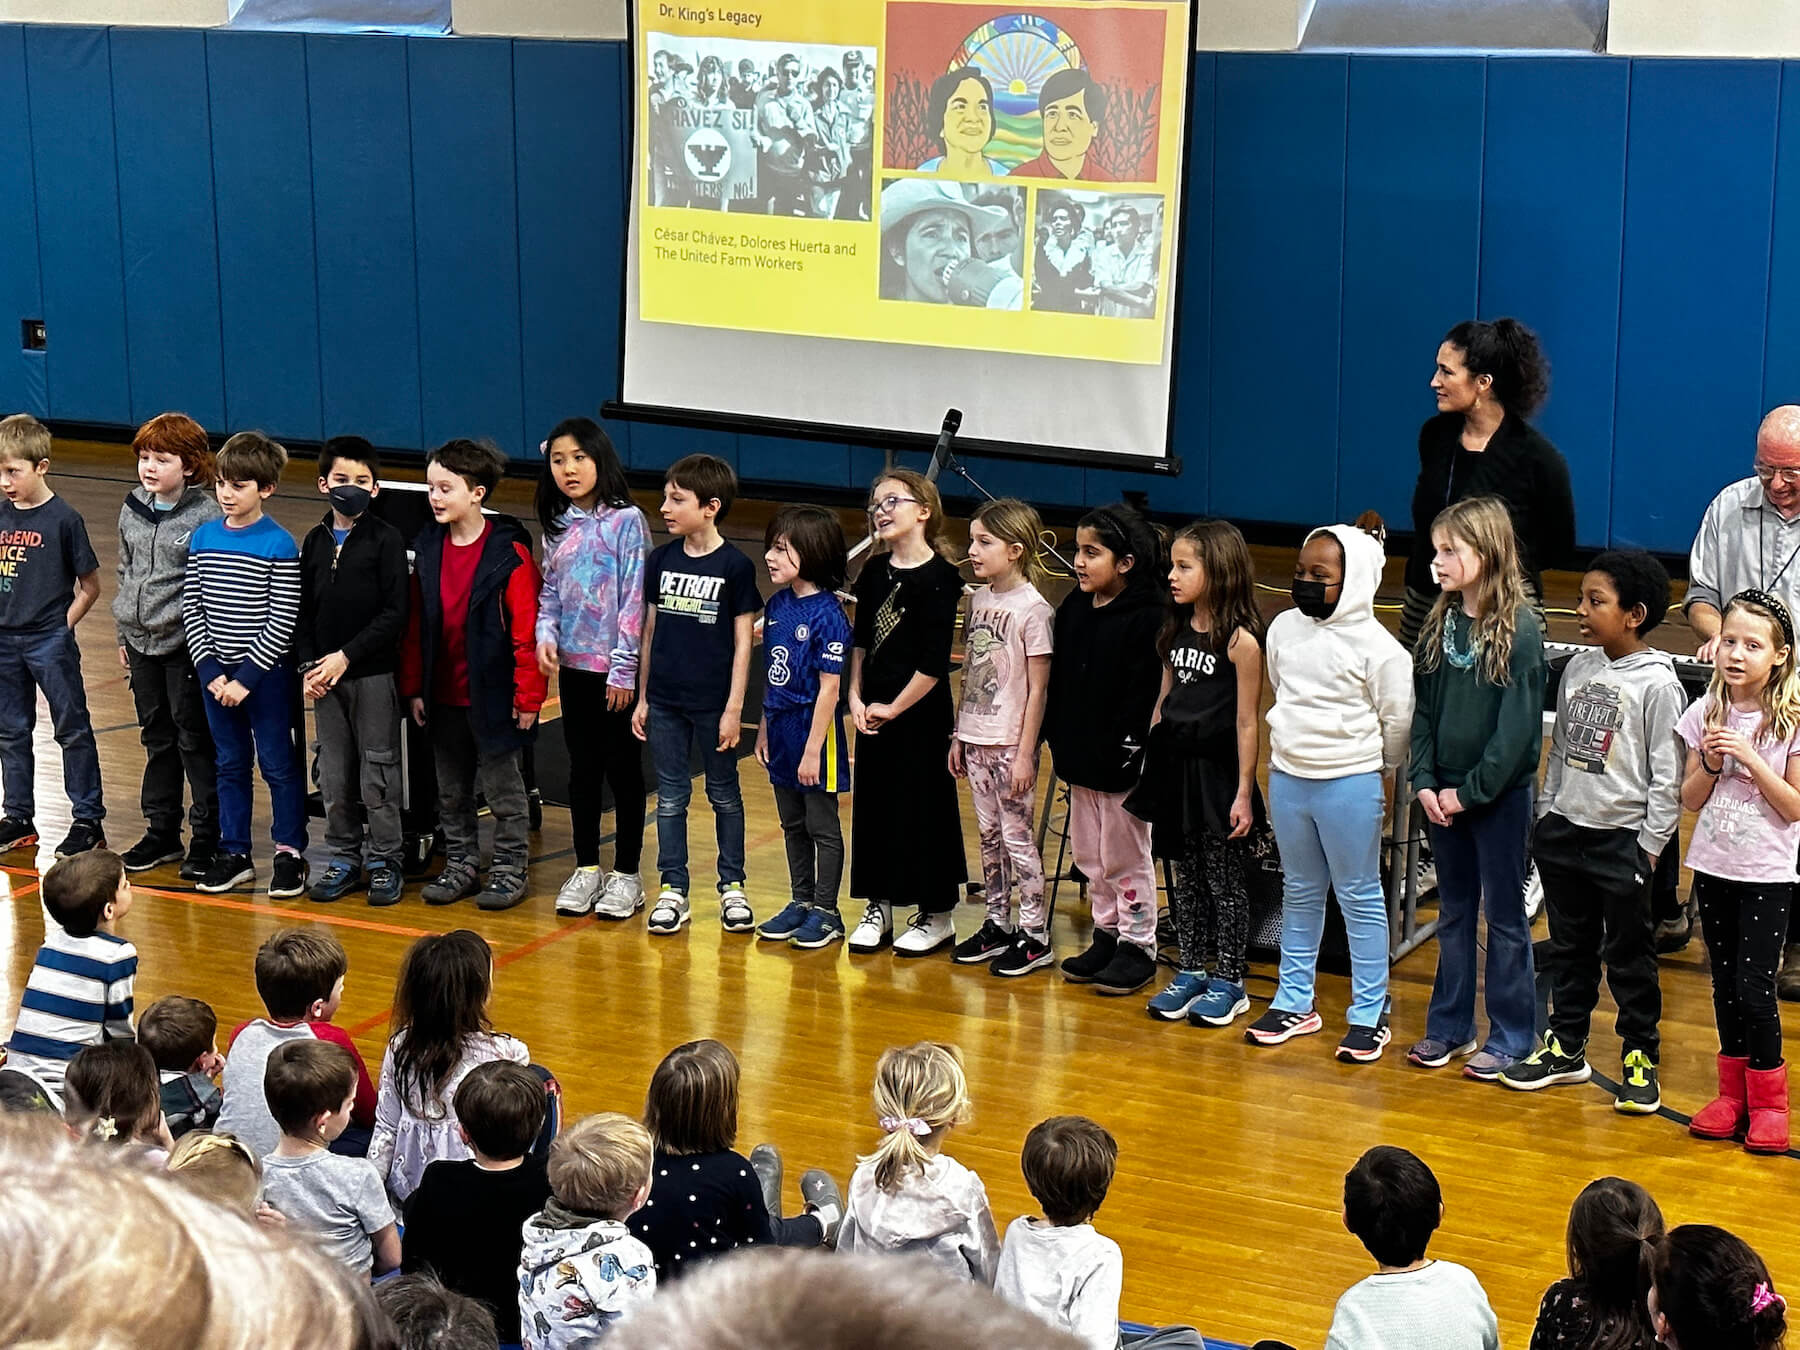 A group of Fieldston Lower students perform a song at assembly in a group.